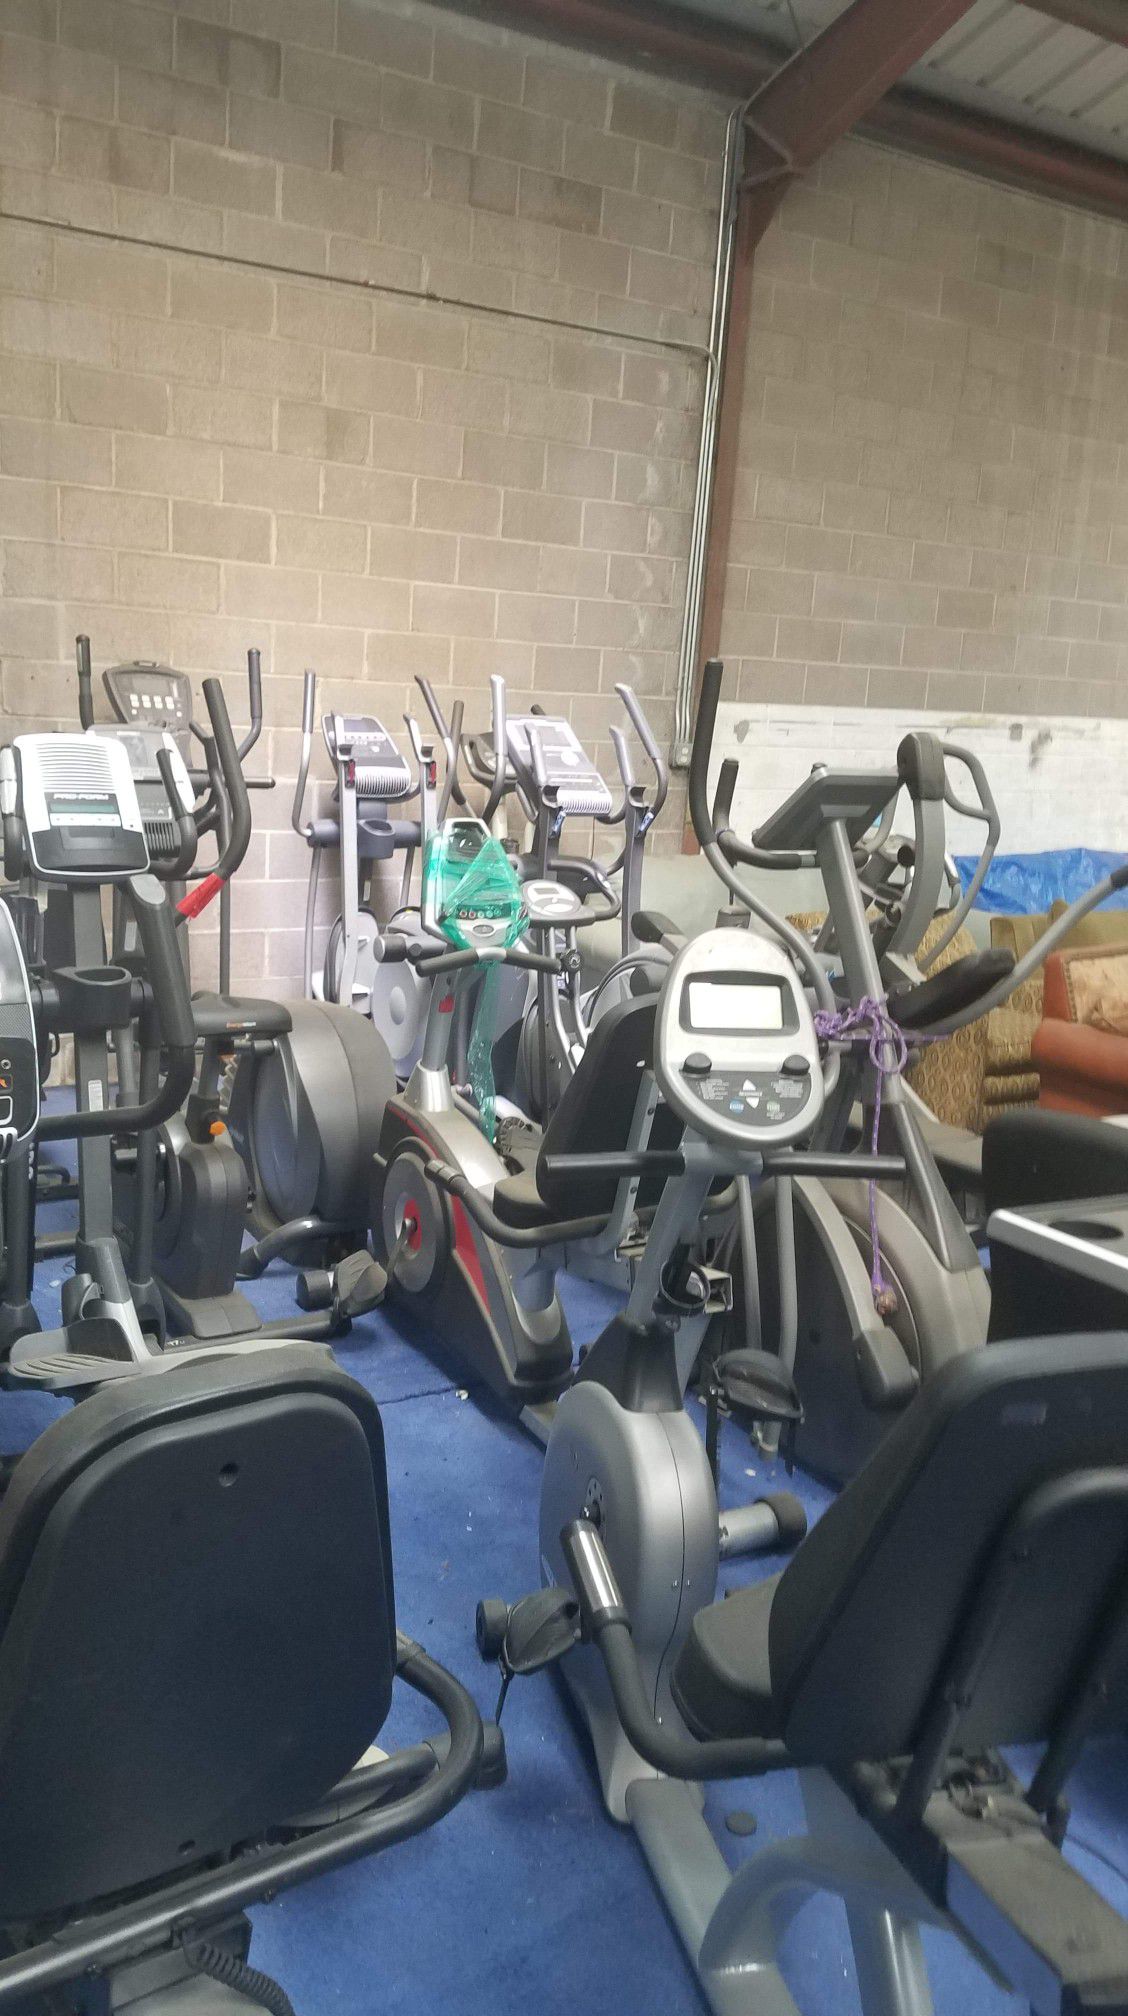 New and used exercise equipment